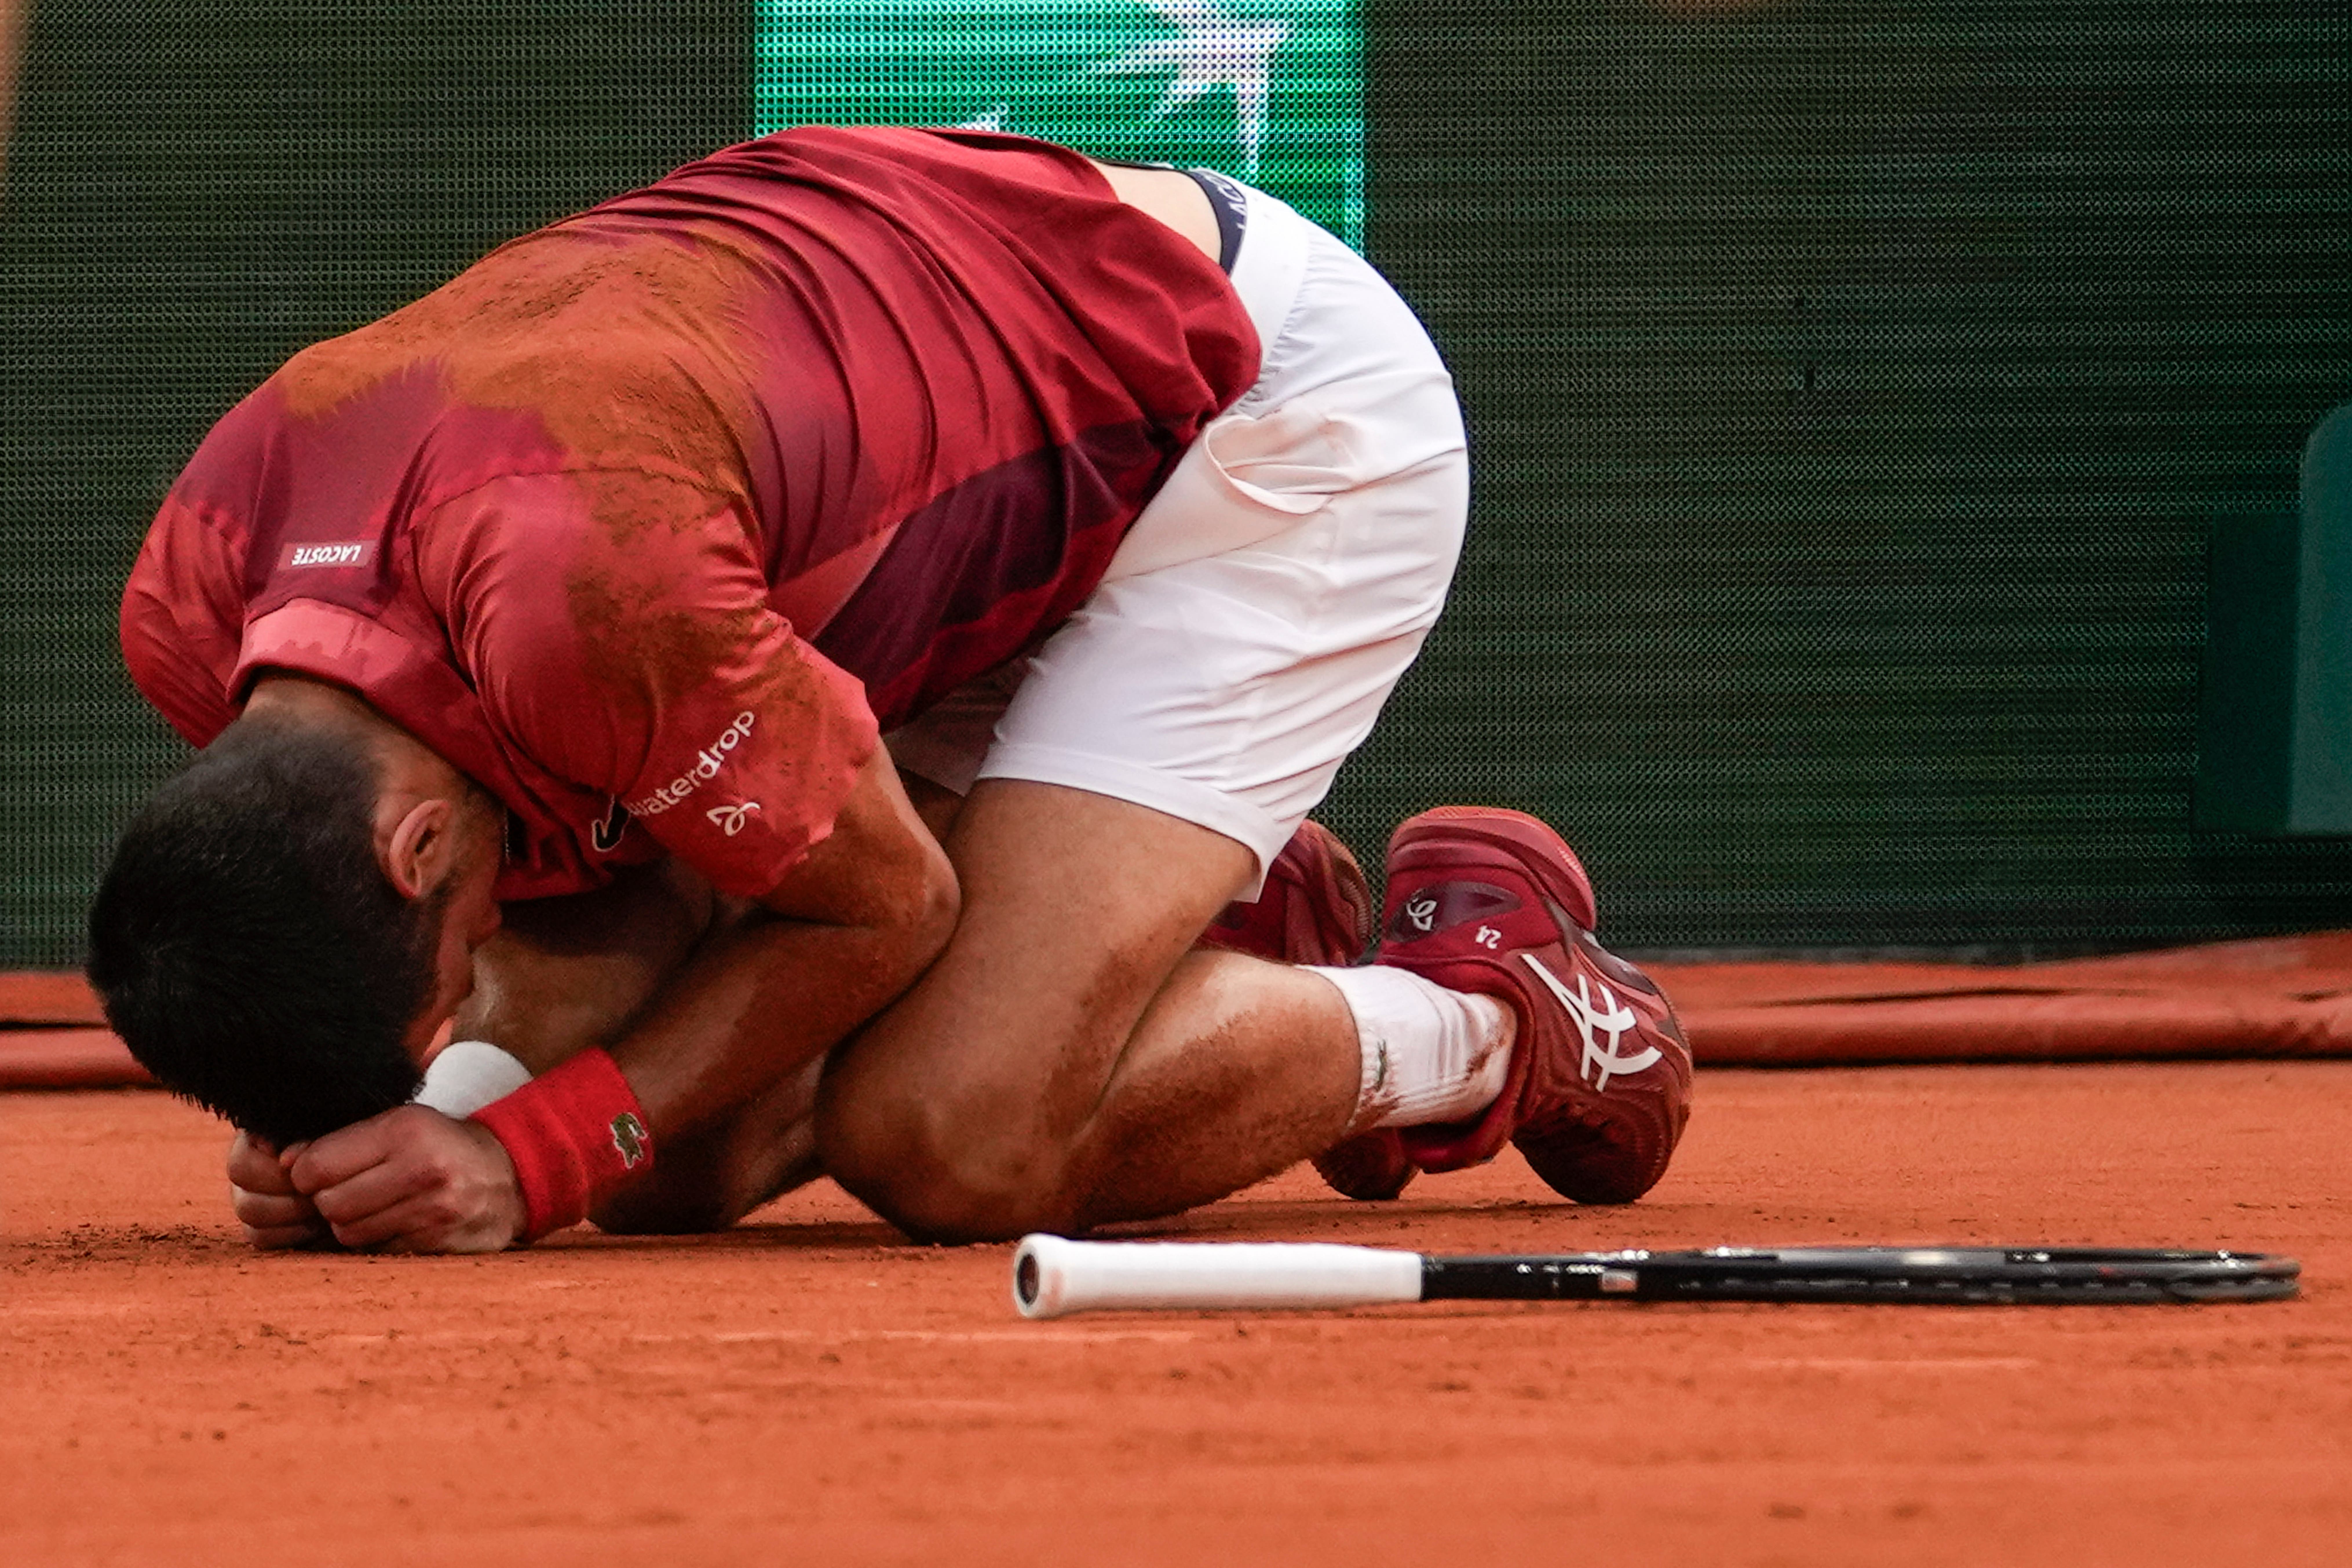 Novak Djokovic battled through injury during his longest-ever match at the French Open